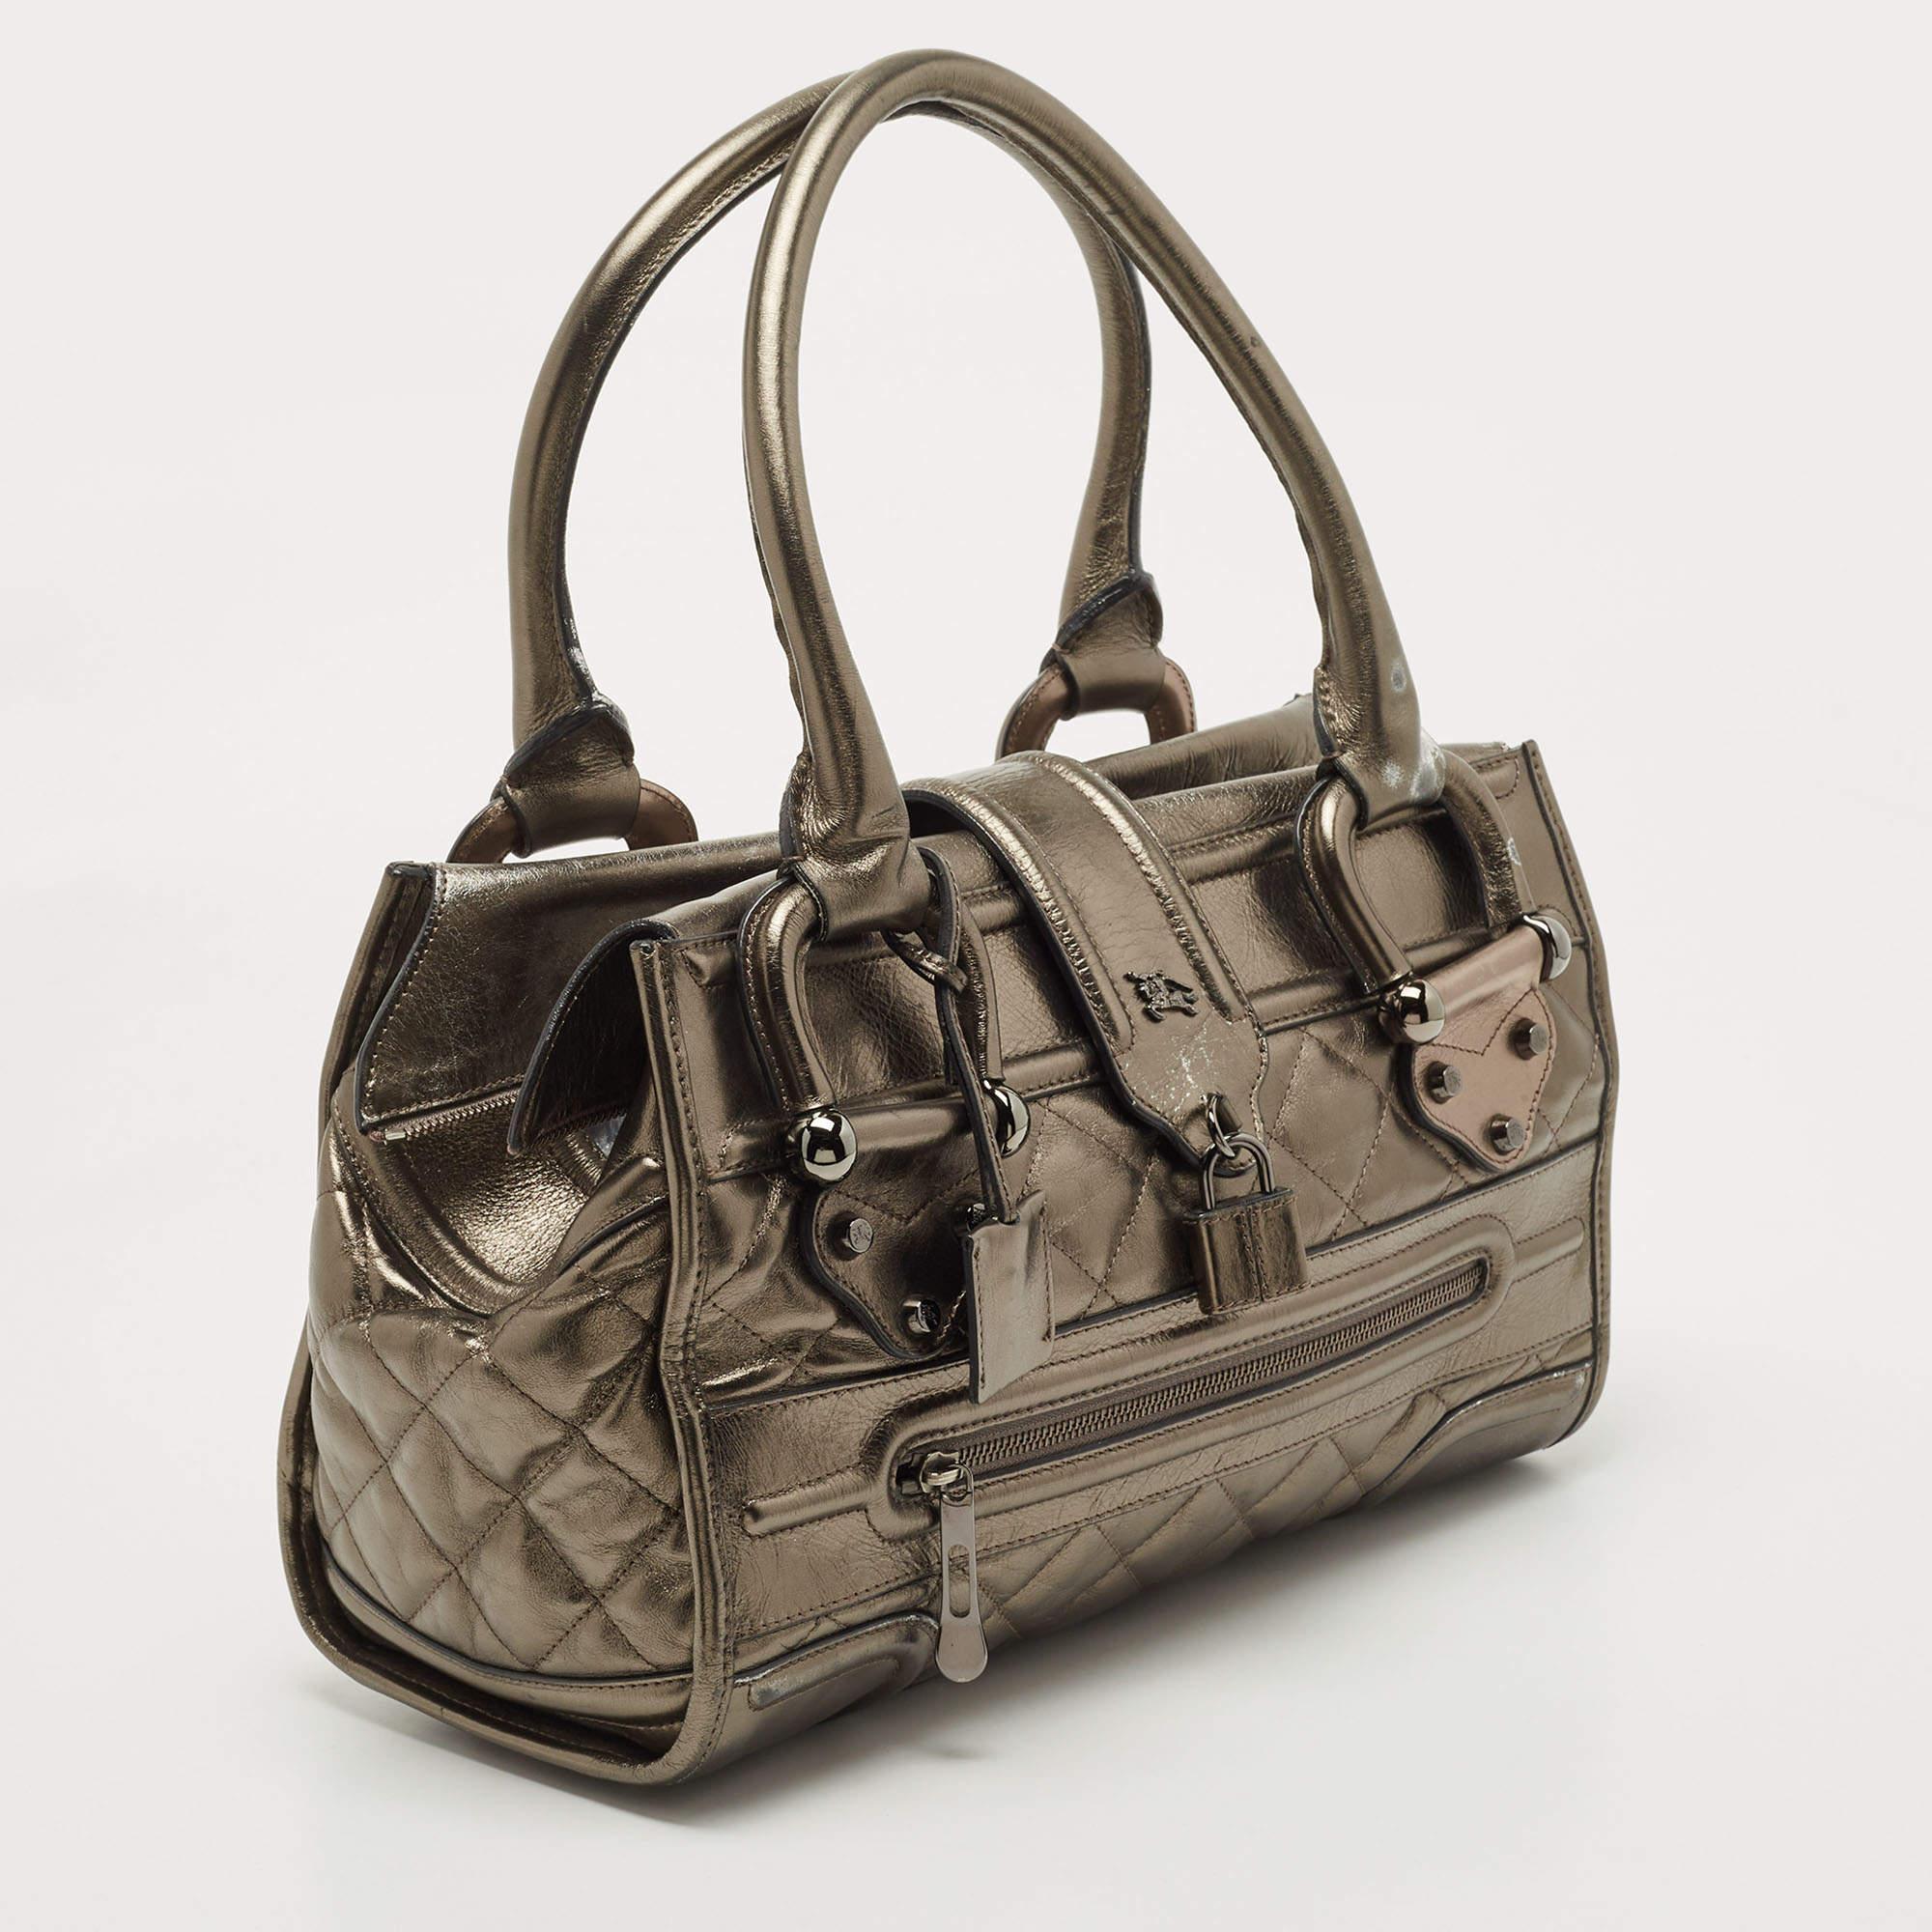 Burberry Metallic Quilted Leather Manor Satchel In Good Condition For Sale In Dubai, Al Qouz 2